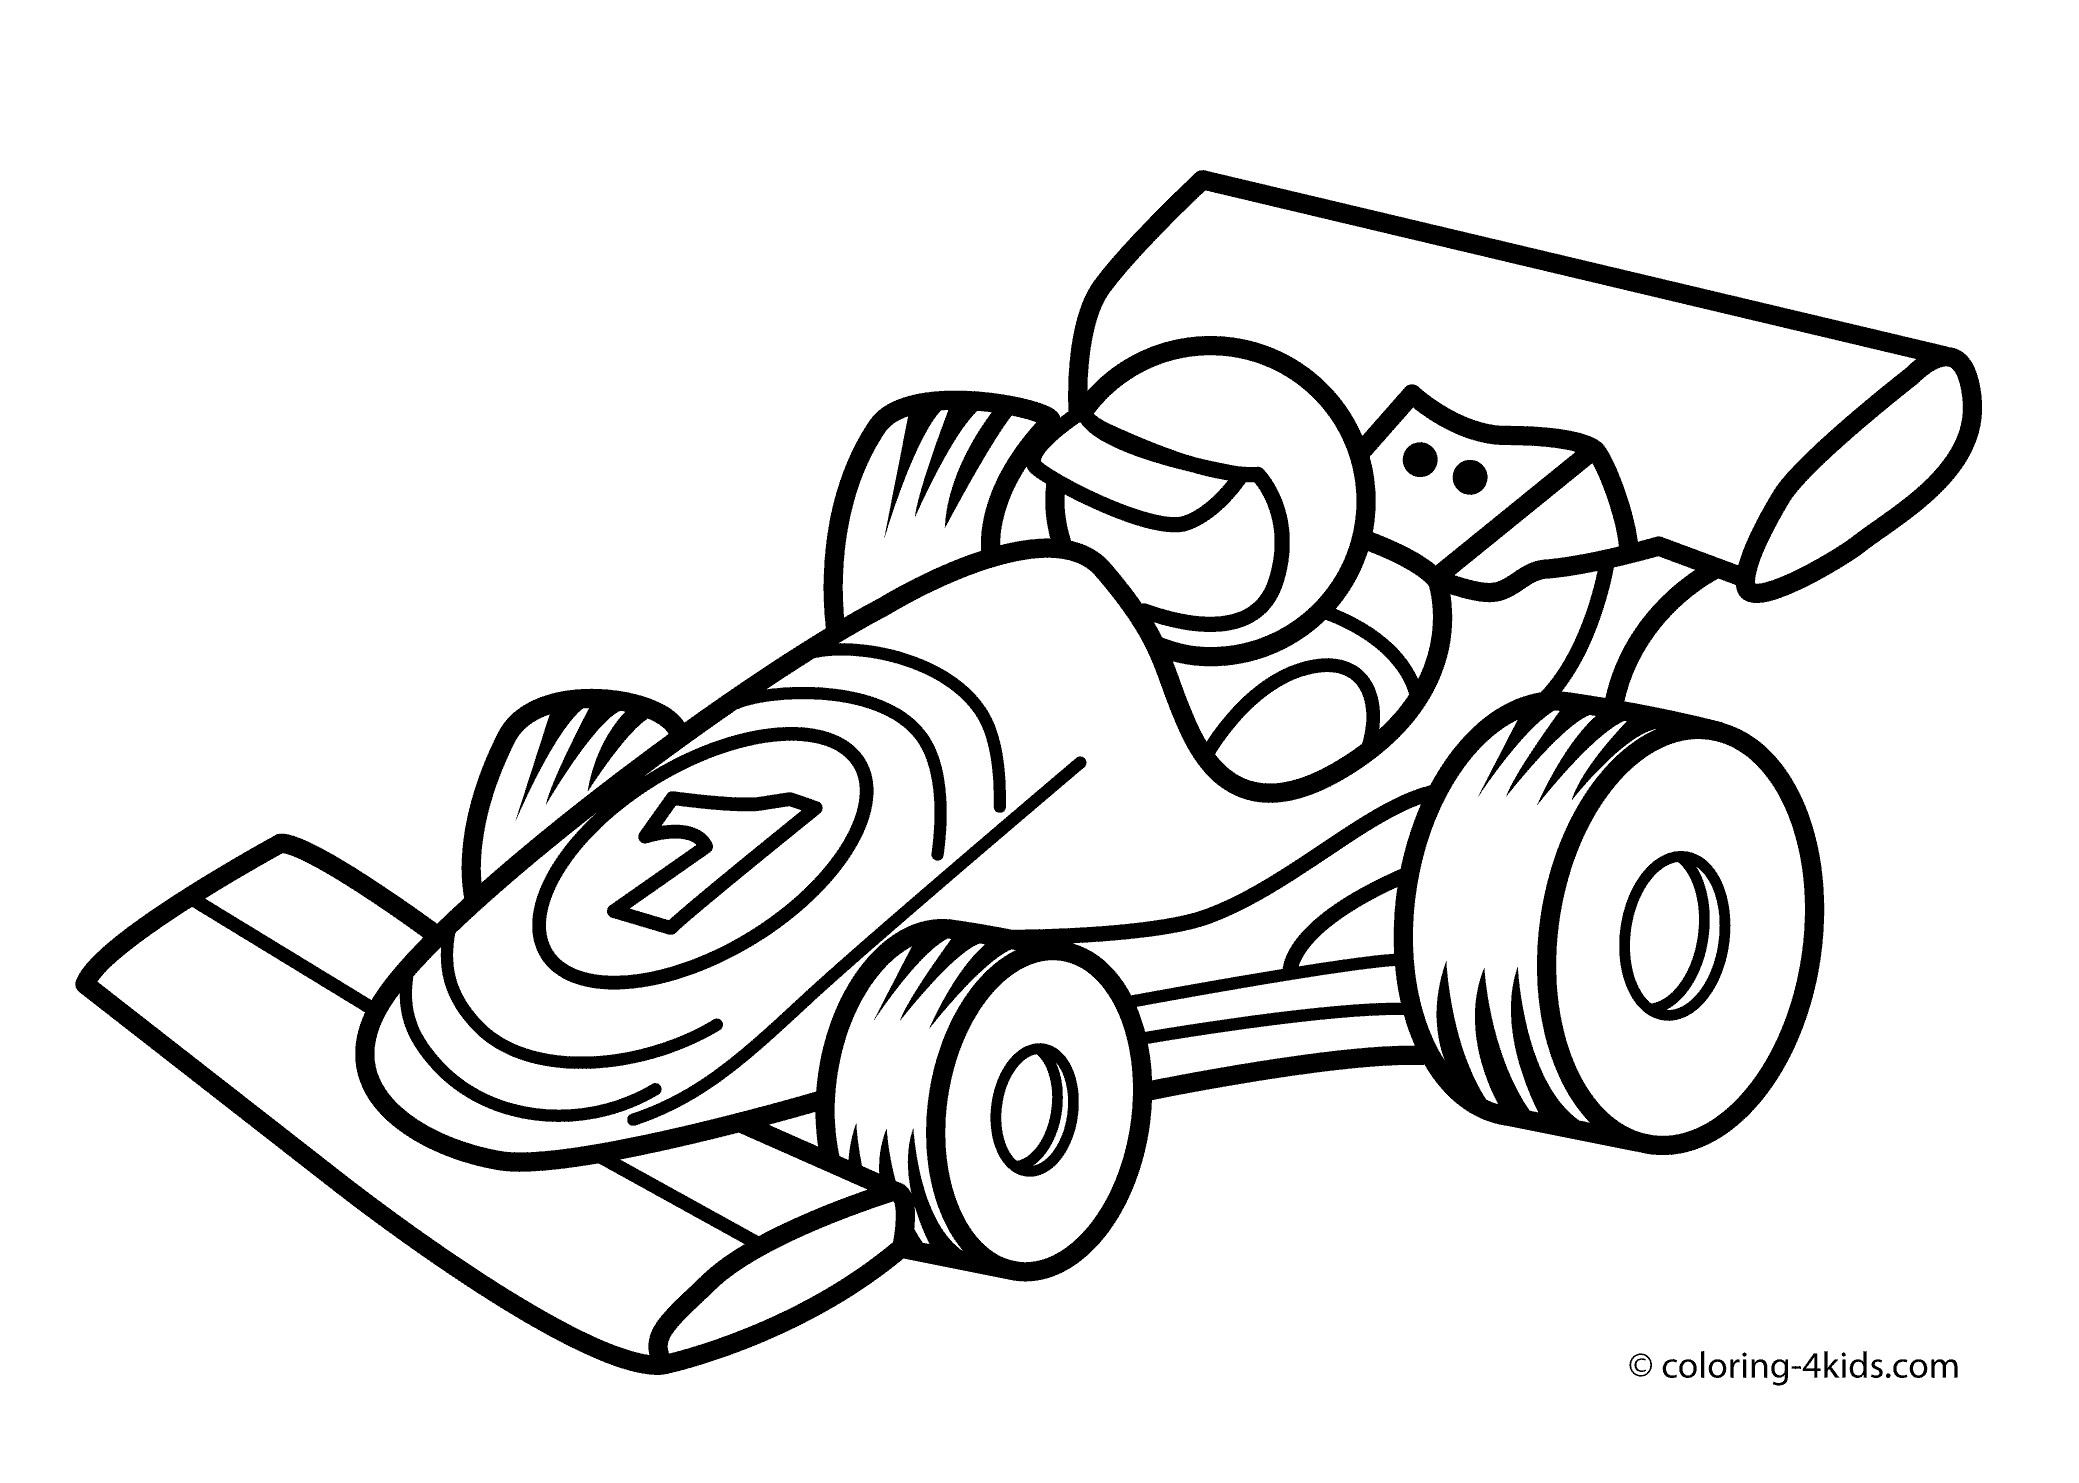 Race Car Coloring Pages For Toddlers
 Racing car transportation coloring pages for kids